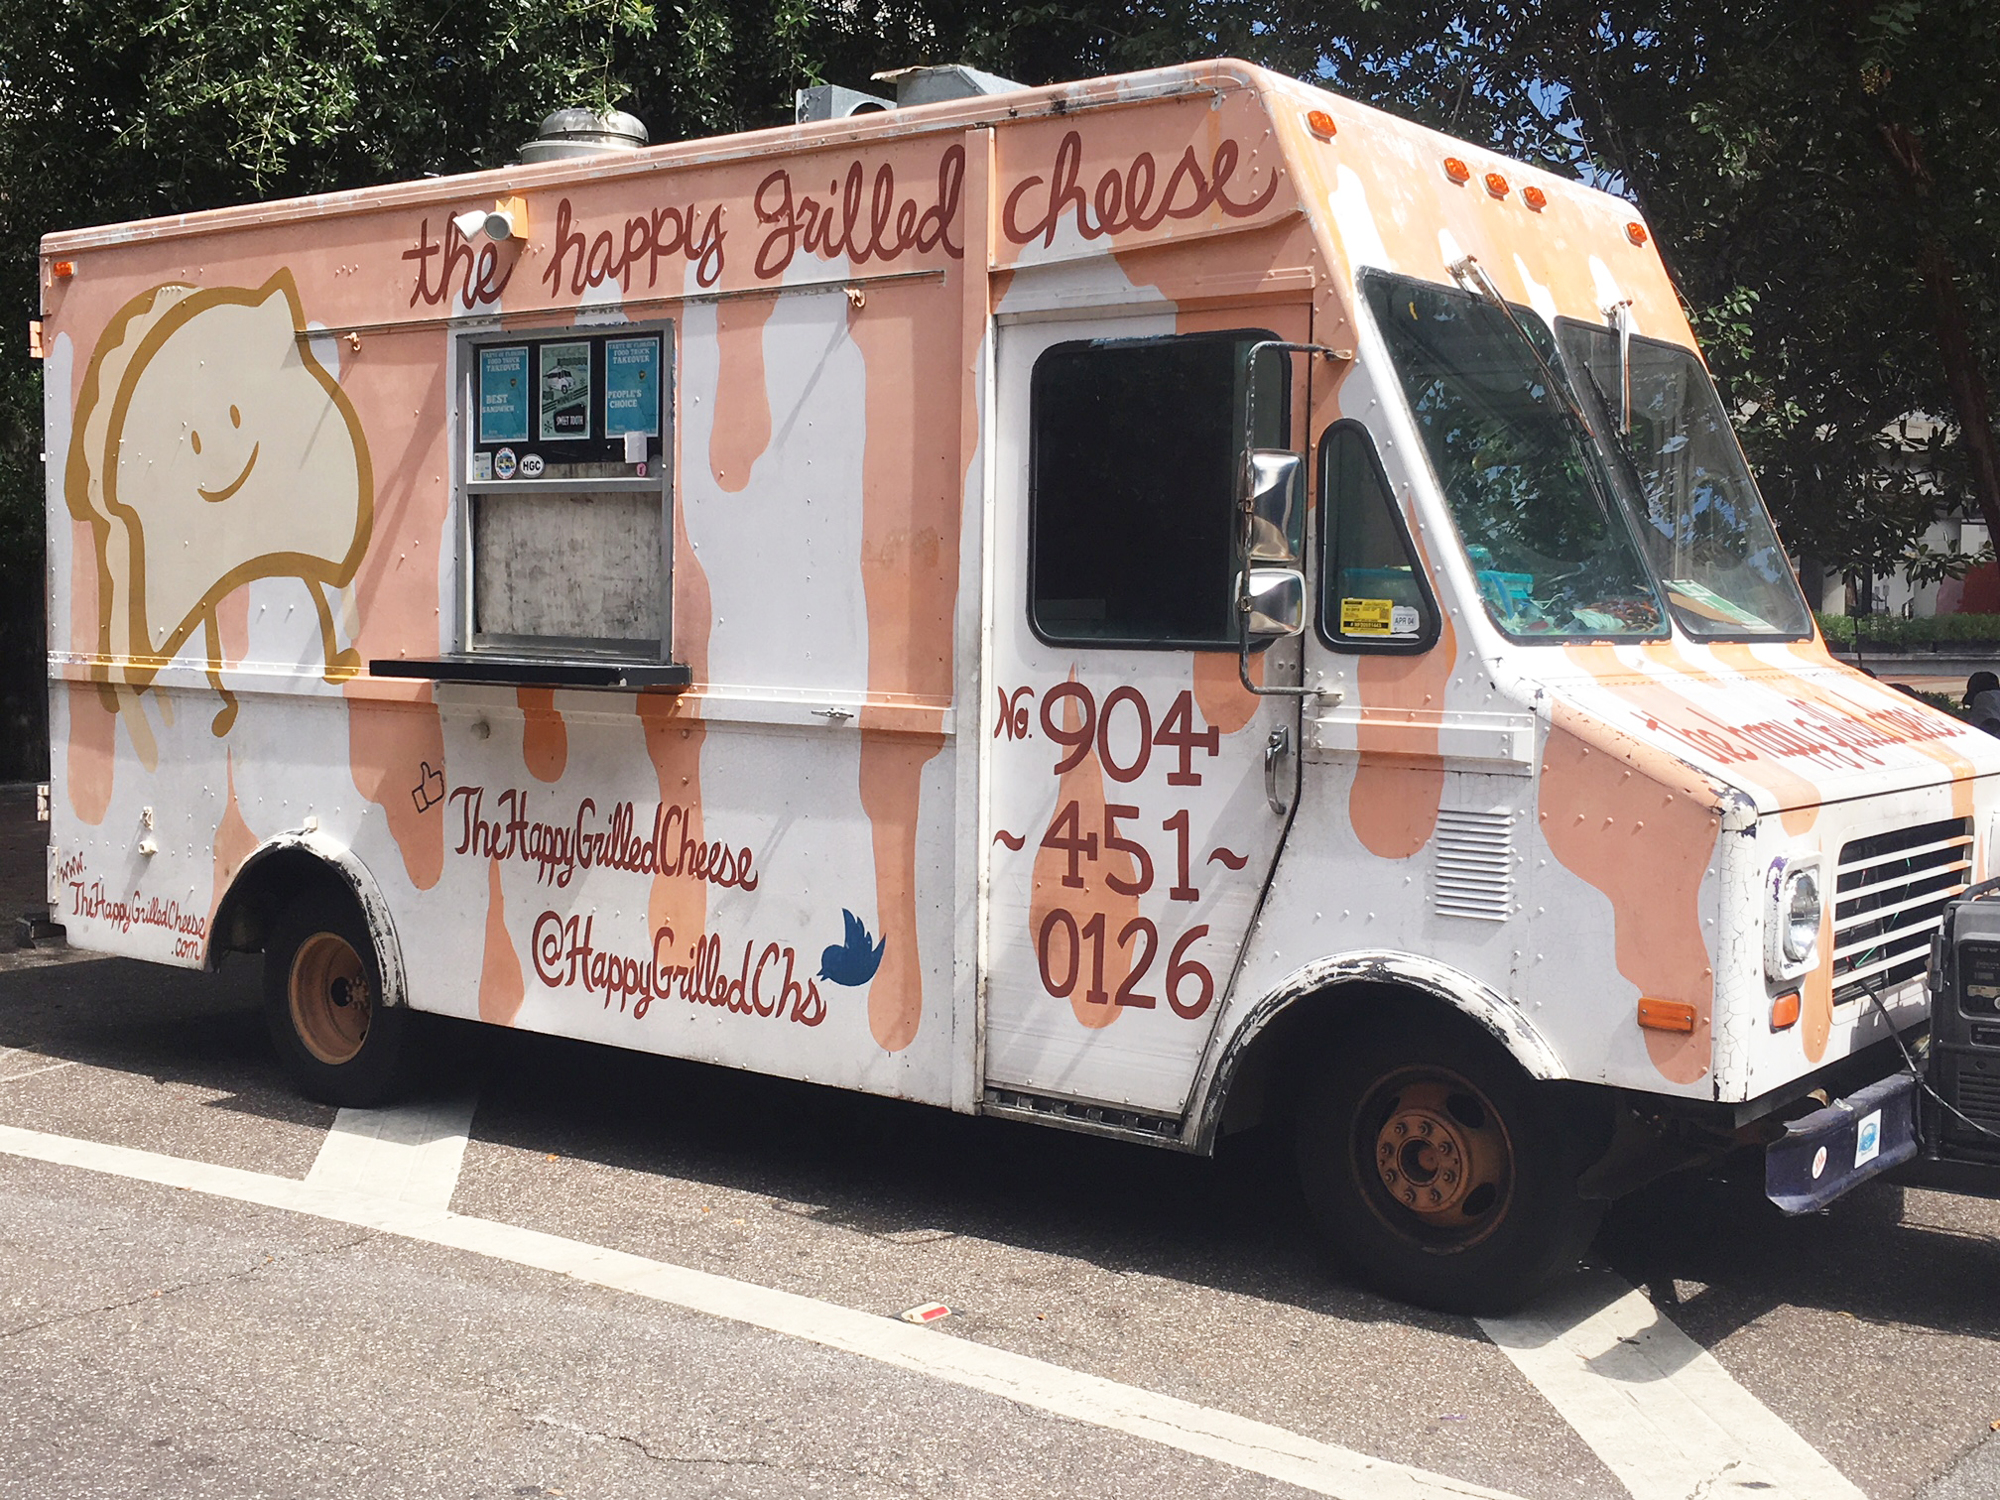 The Happy Grilled Cheese food truck was launched in 2013. While there’s now a brick-and-mortar restaurant Downtown, the truck is still in use.